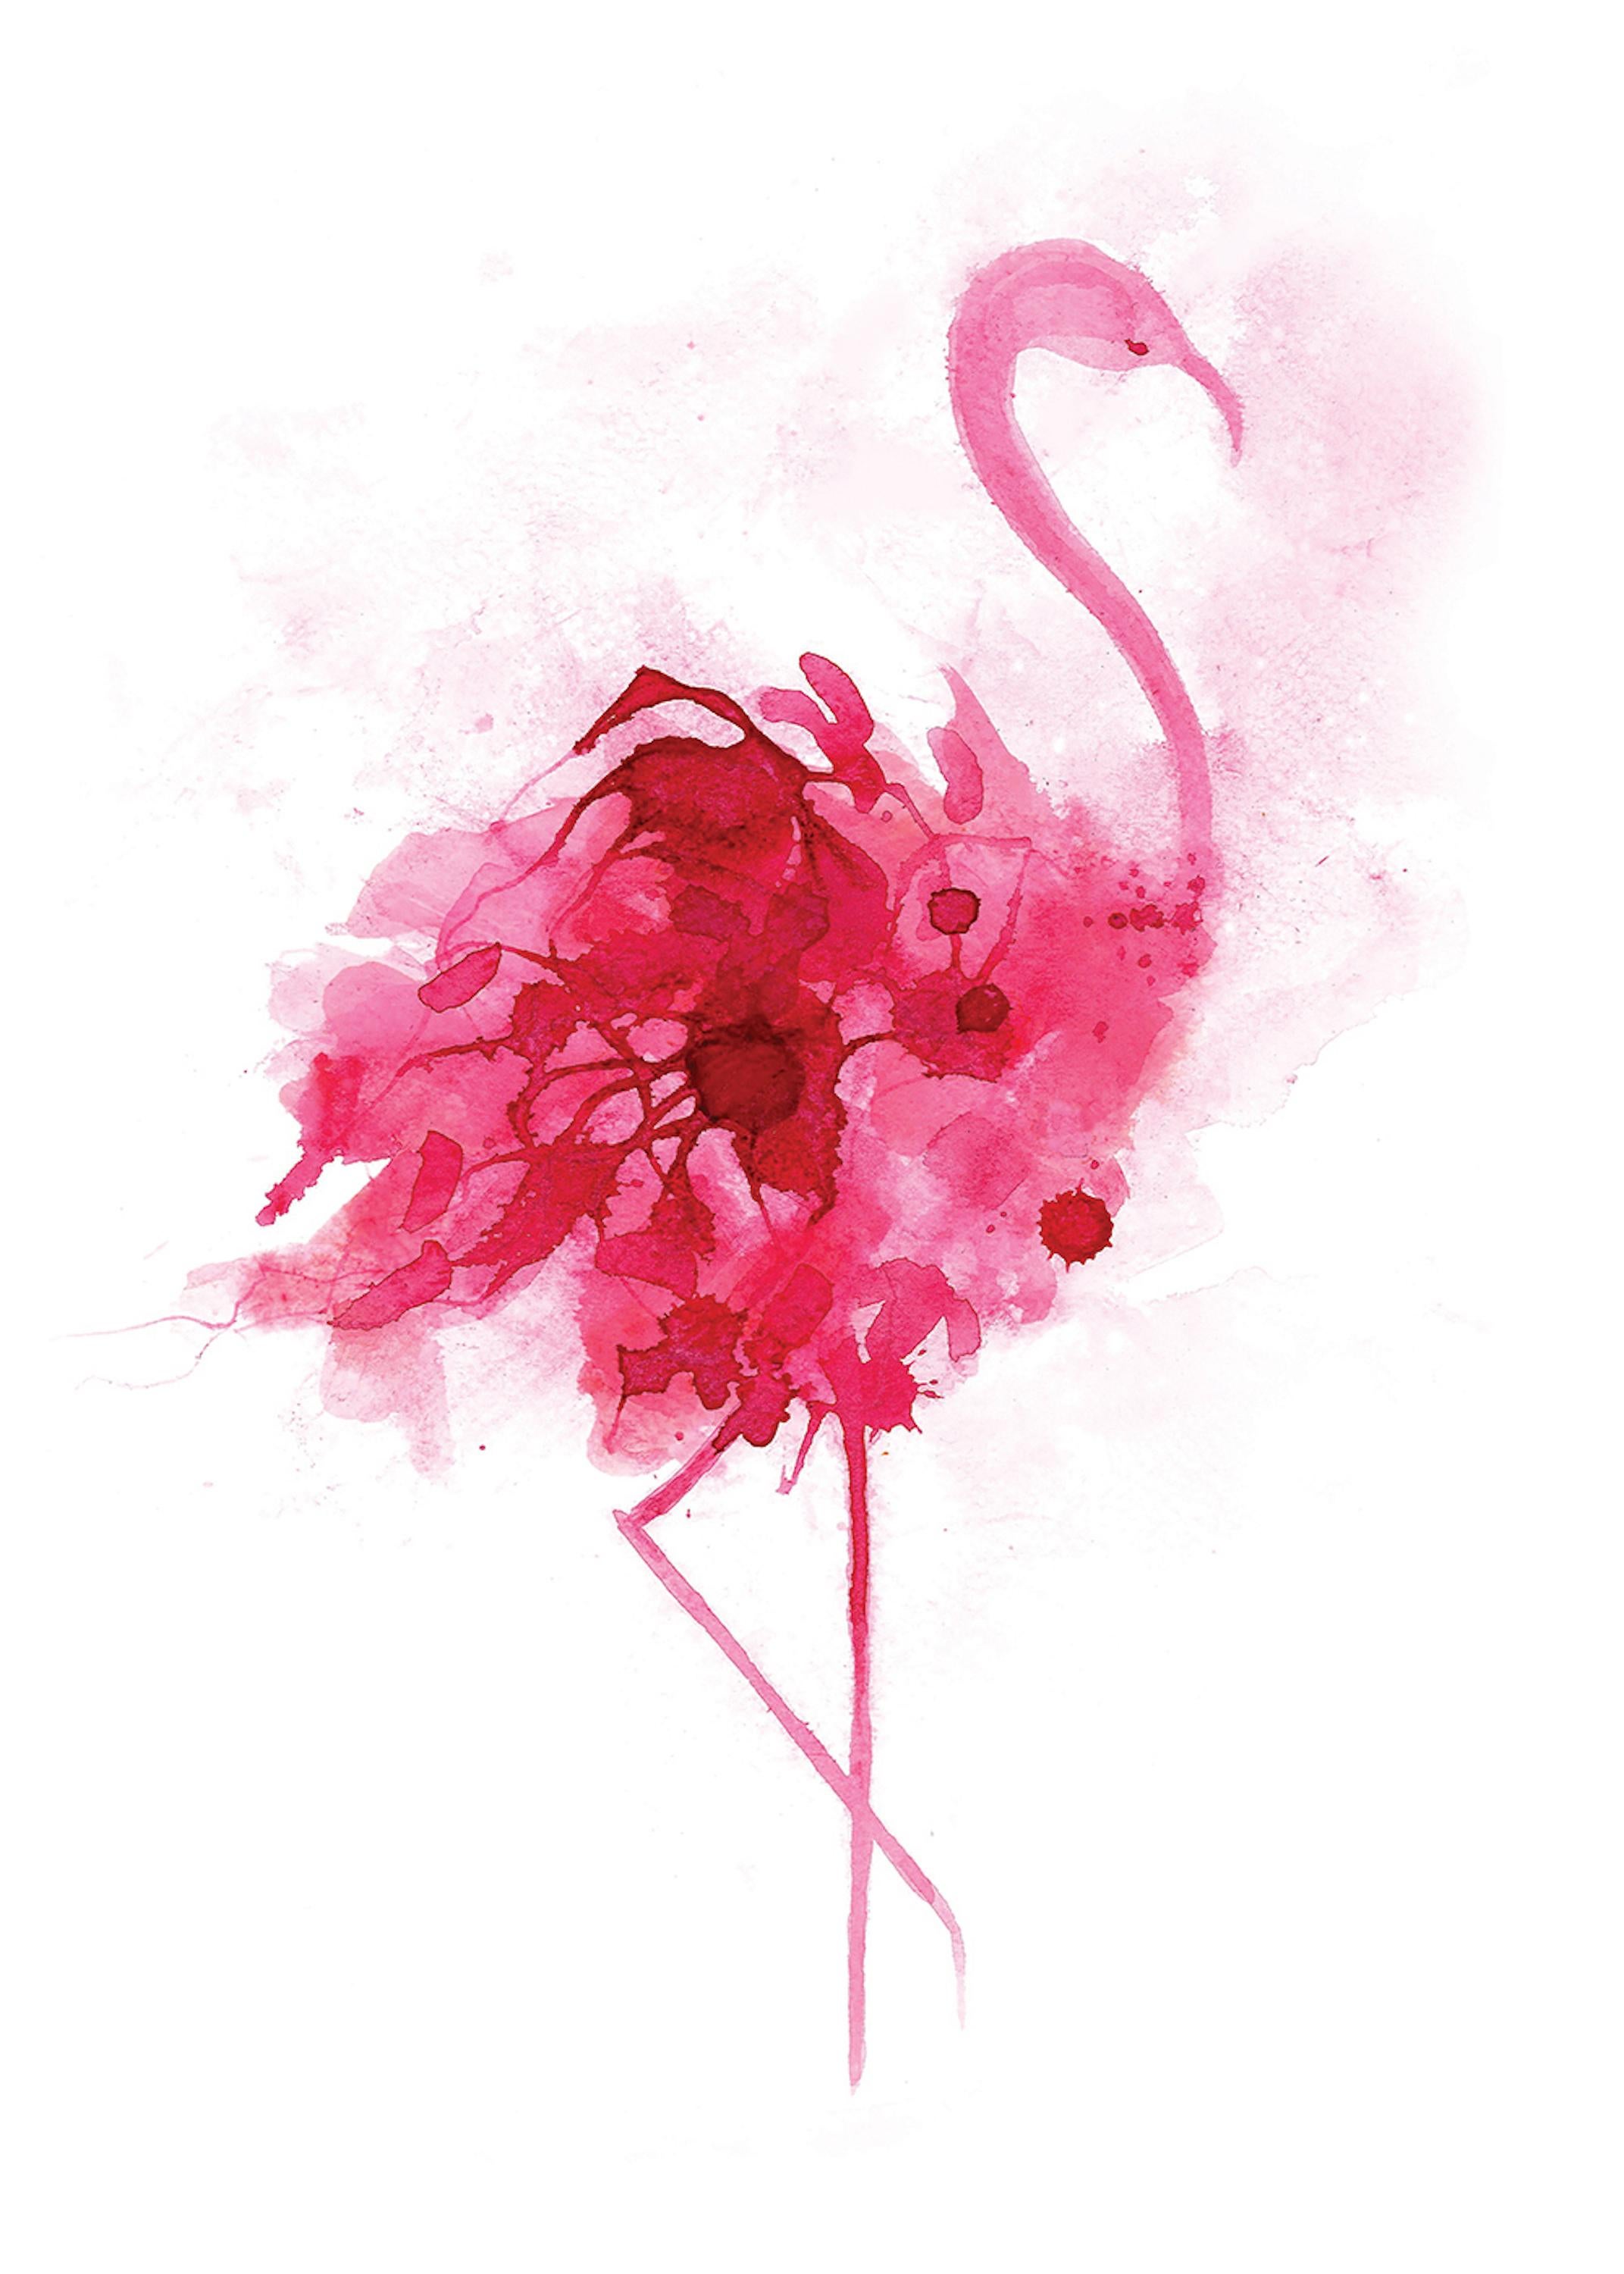 Flamingo .

A beautiful CYMK silk screen print by Gavin Dobson.

Based on an original watercolour painting of this iconic bird, this popular piece of art is individually hand printed by the artist using half tones to create the layered pinks and